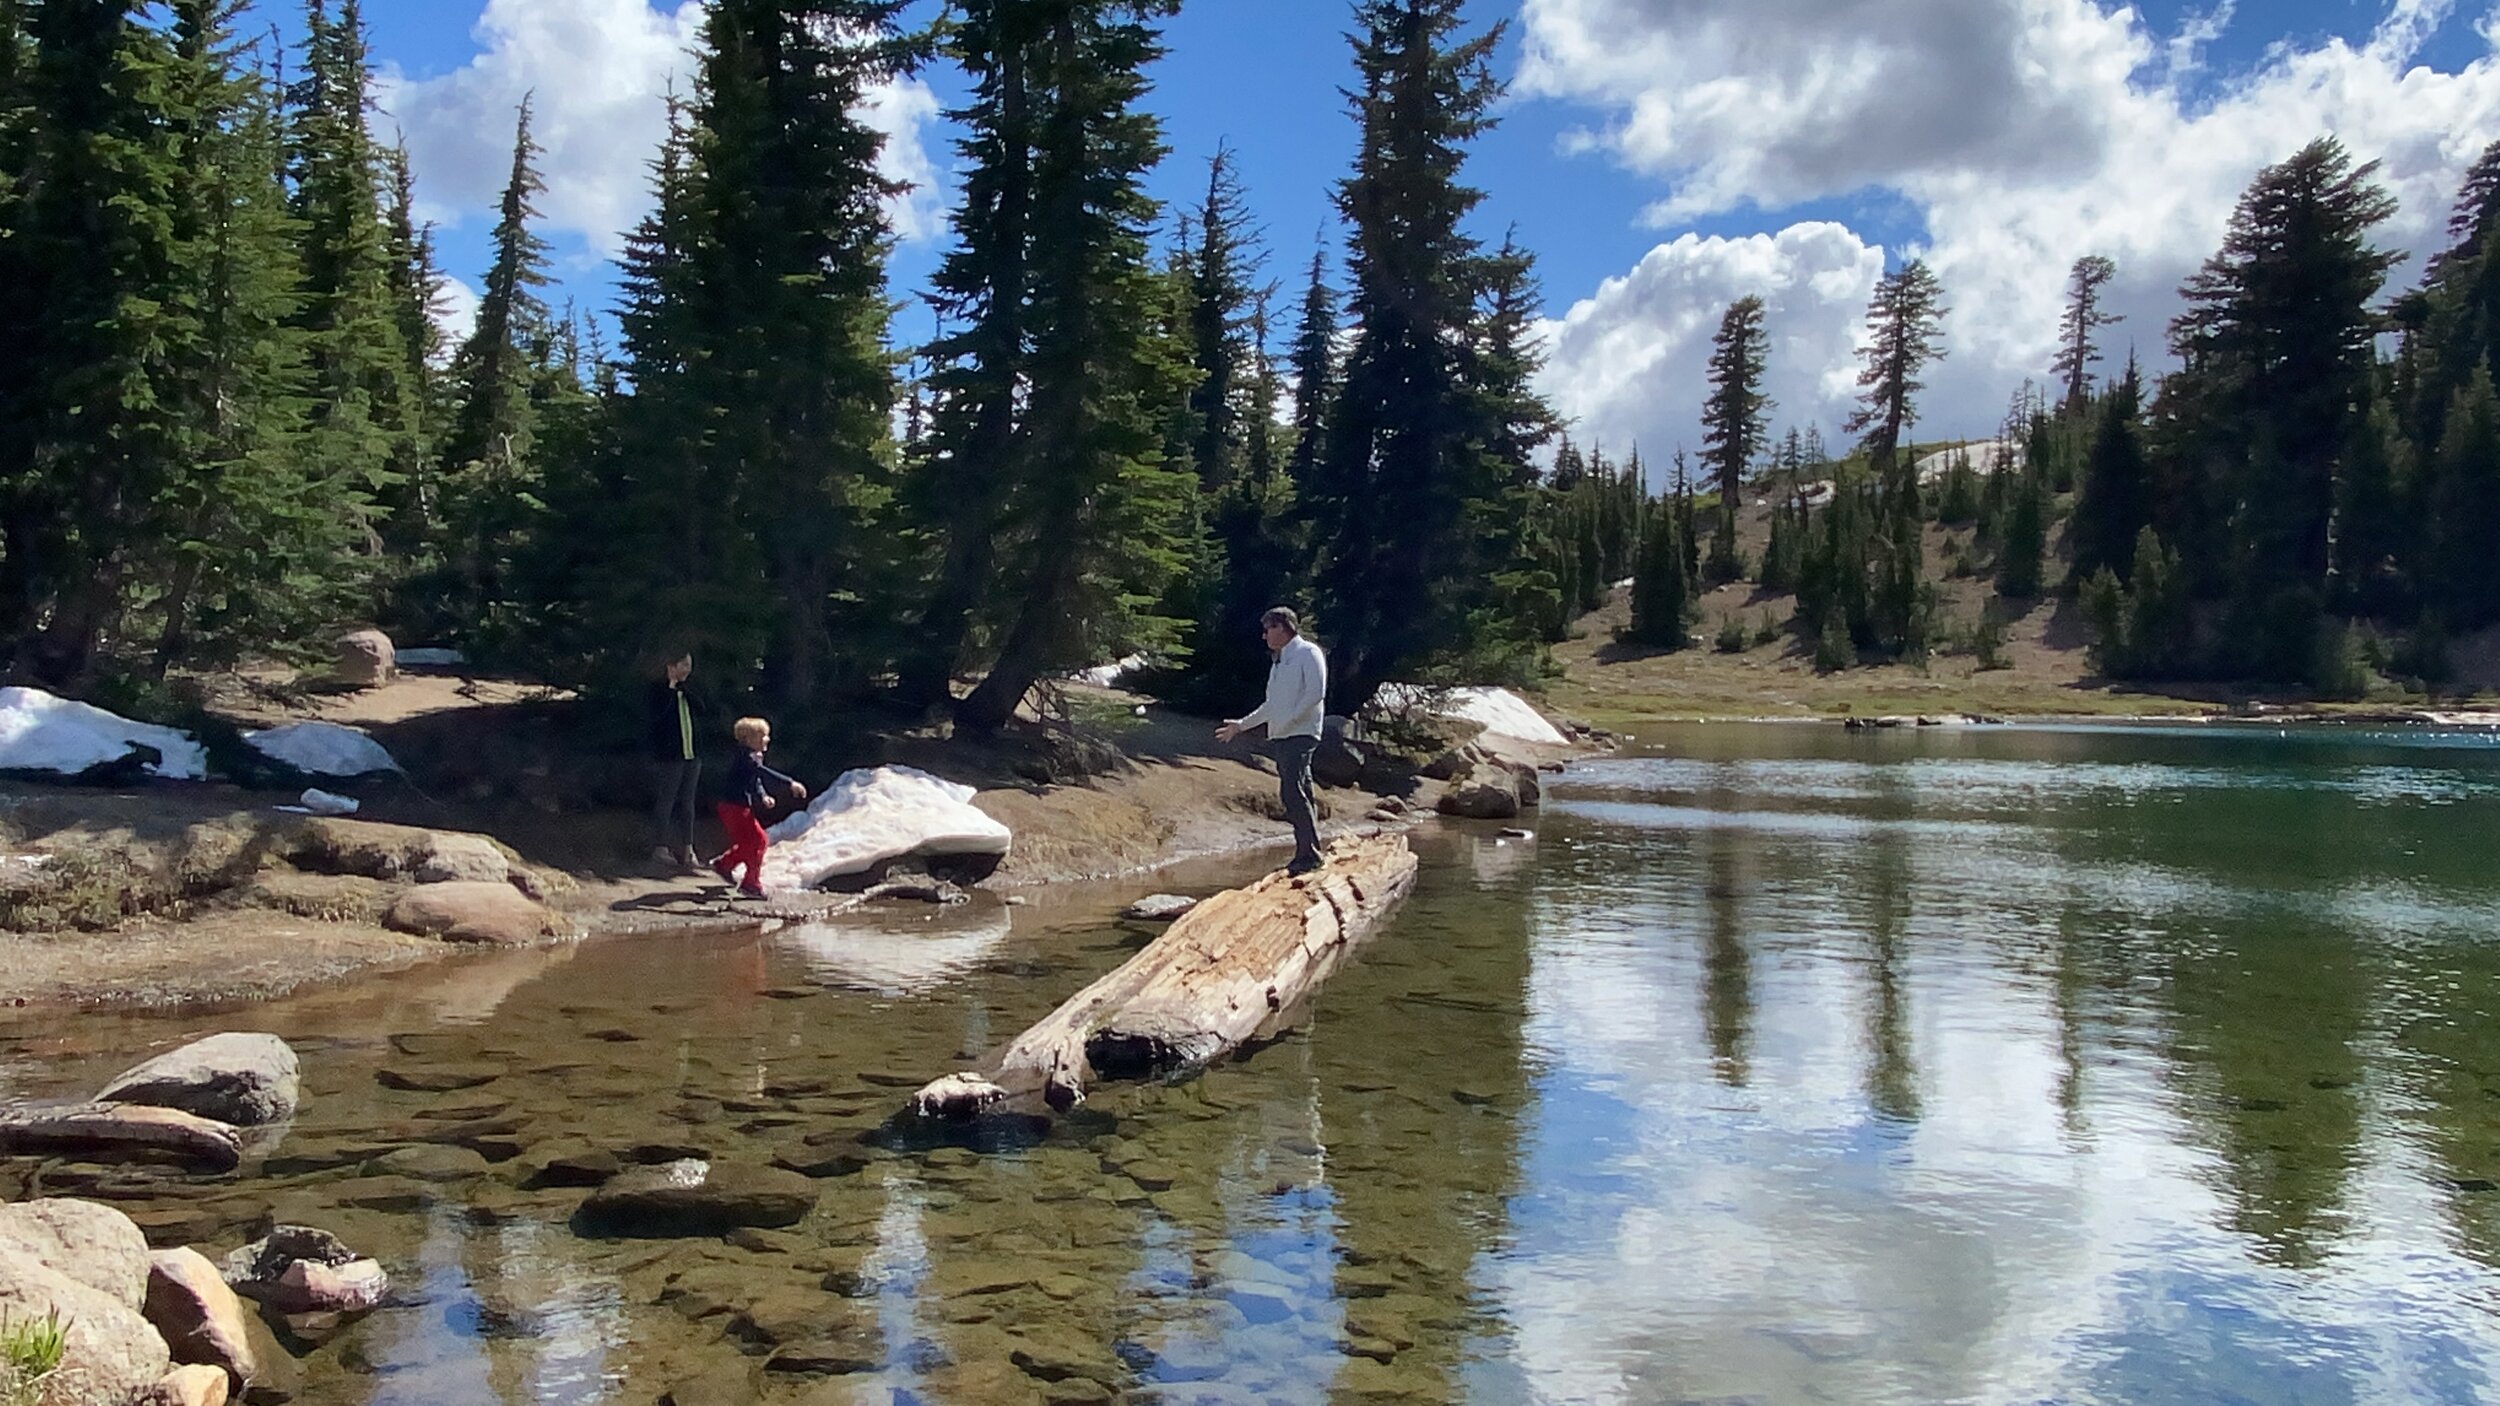 Daddy climbs out onto a downed tree and catches the snowballs Popcorn has been anxious to throw at him.  All on beautiful and clear Emerald Lake.  Photo by Karen Boudreaux, June 8, 2021